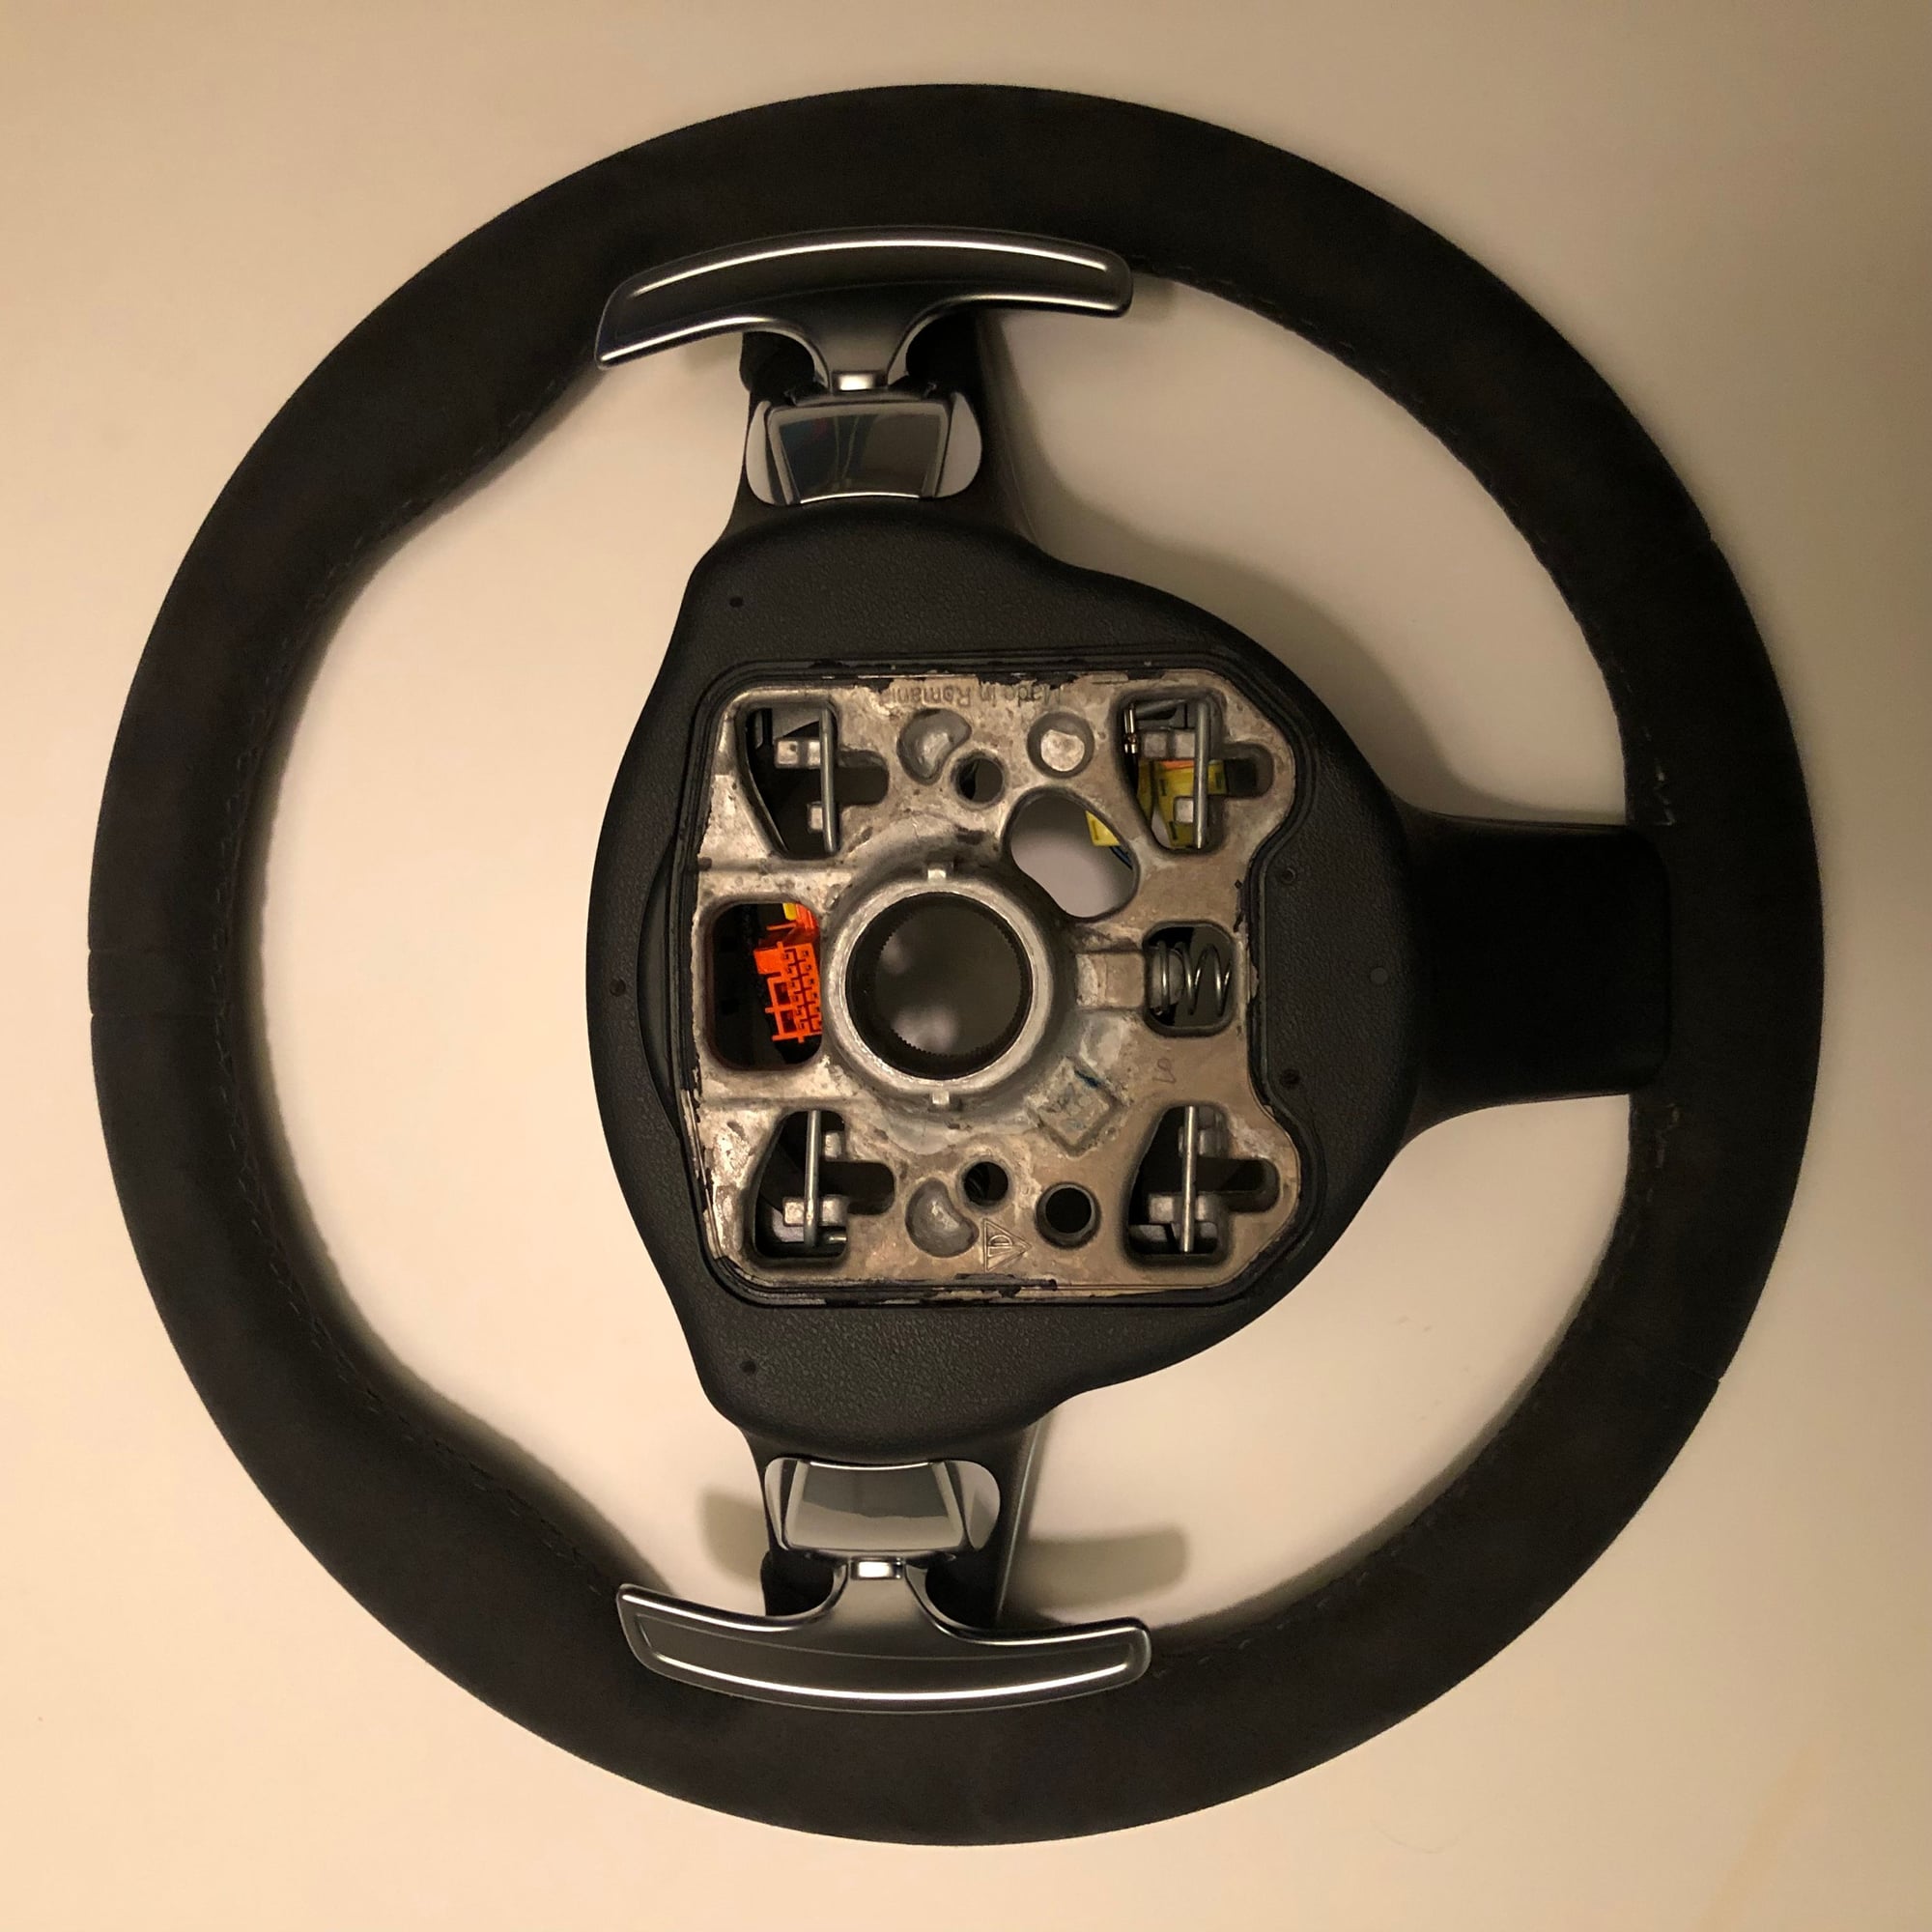 Interior/Upholstery - 911.1 PDK Paddleshift Sport Design Steering Wheel in Alcantara -- Excellent Condition - Used - 2013 to 2016 Porsche 911 - New York City, NY 11217, United States